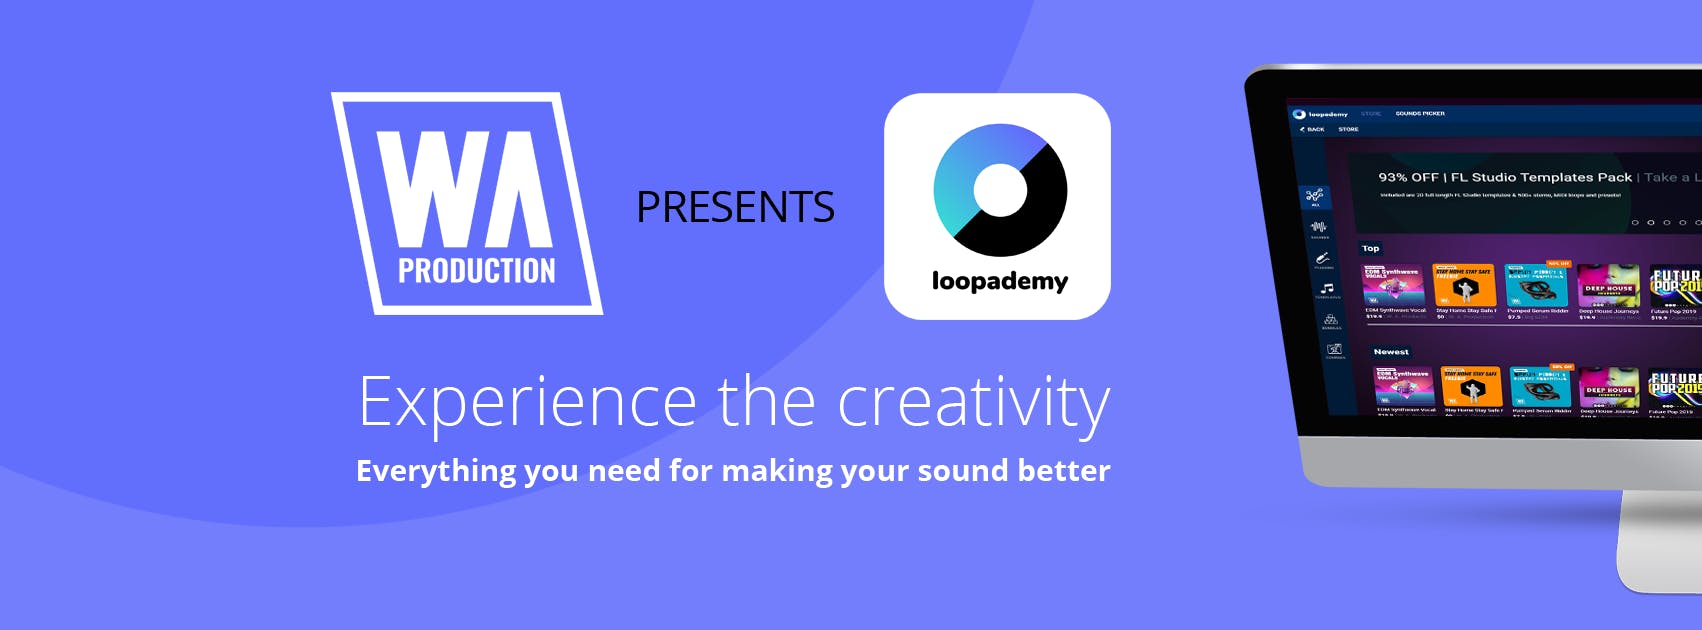 Loopademy | W. A. Production